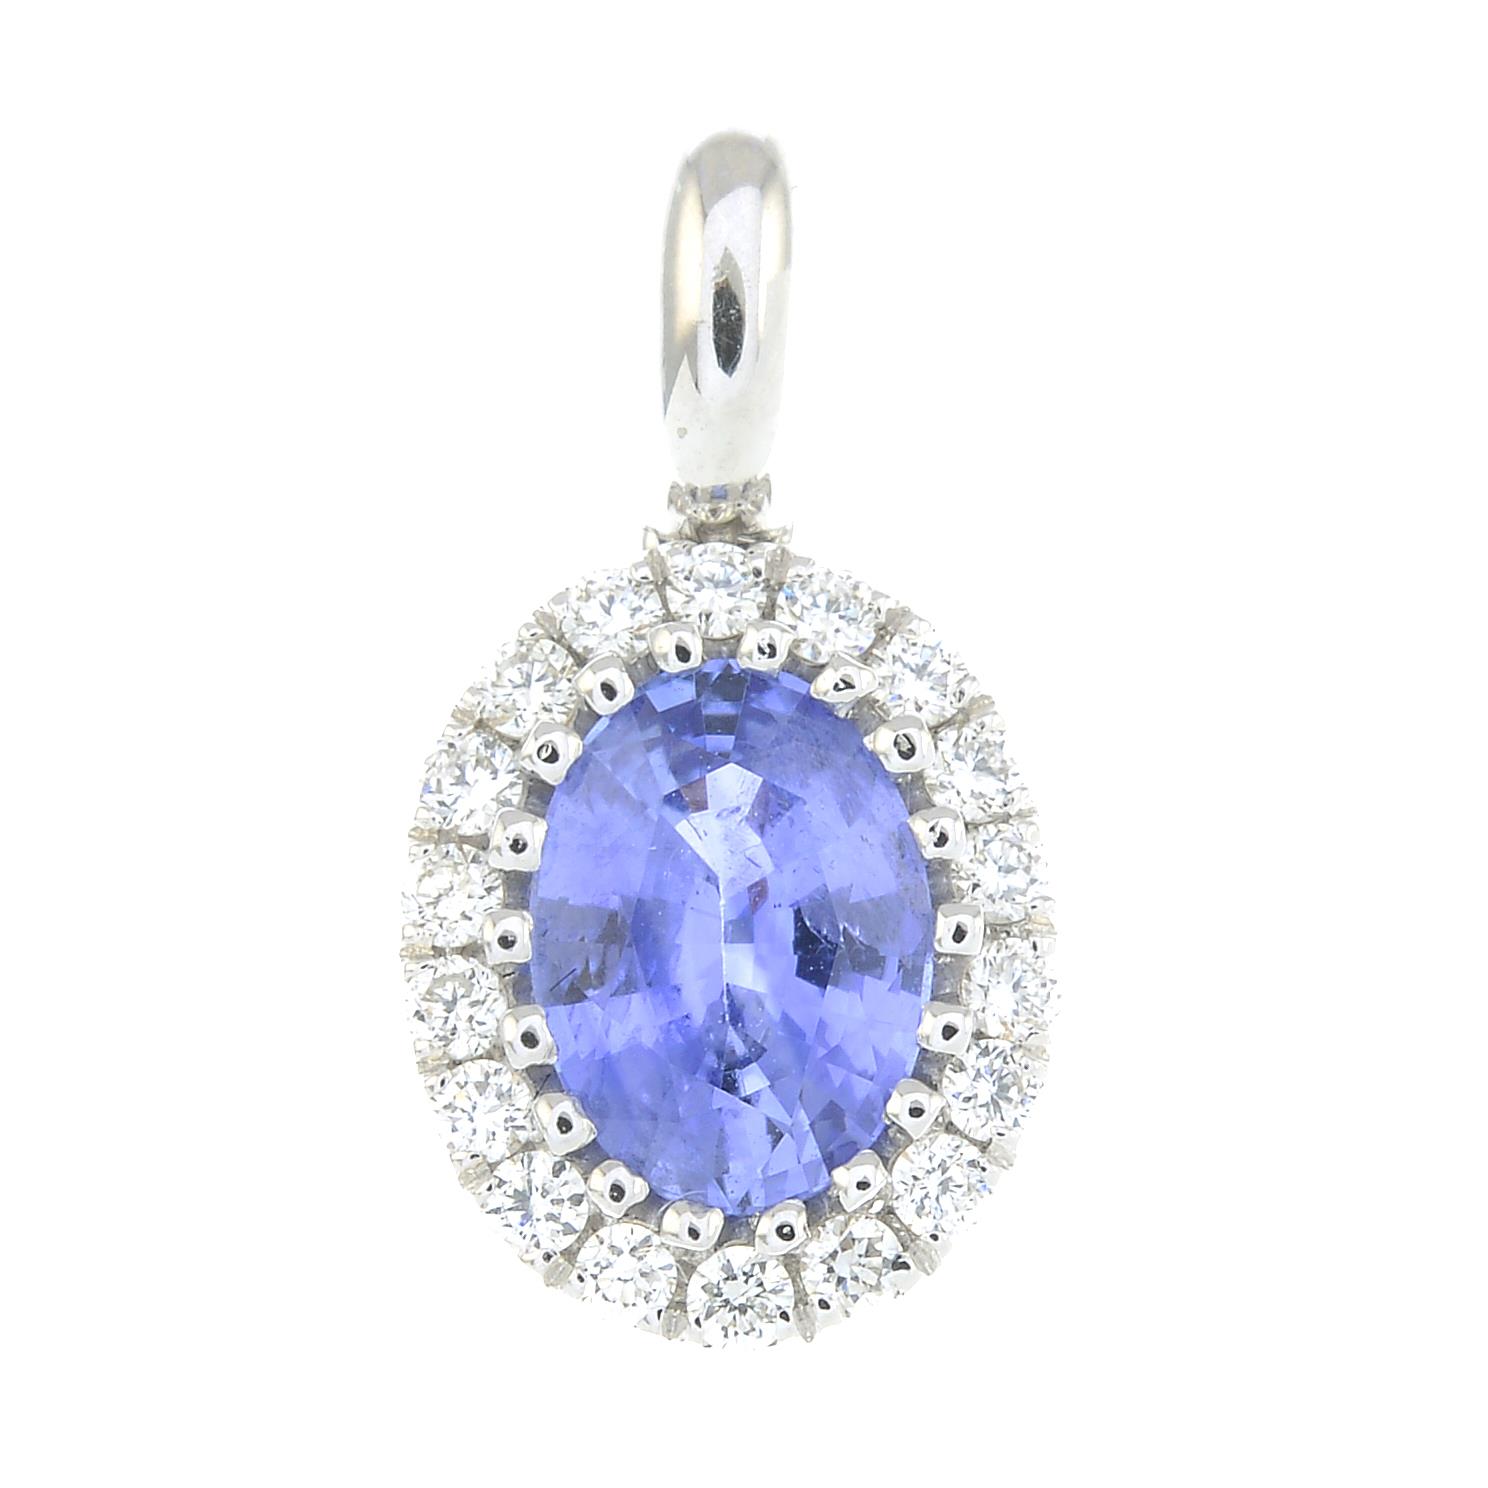 A diamond and sapphire cluster pendant.Sapphire weight 0.89ct.